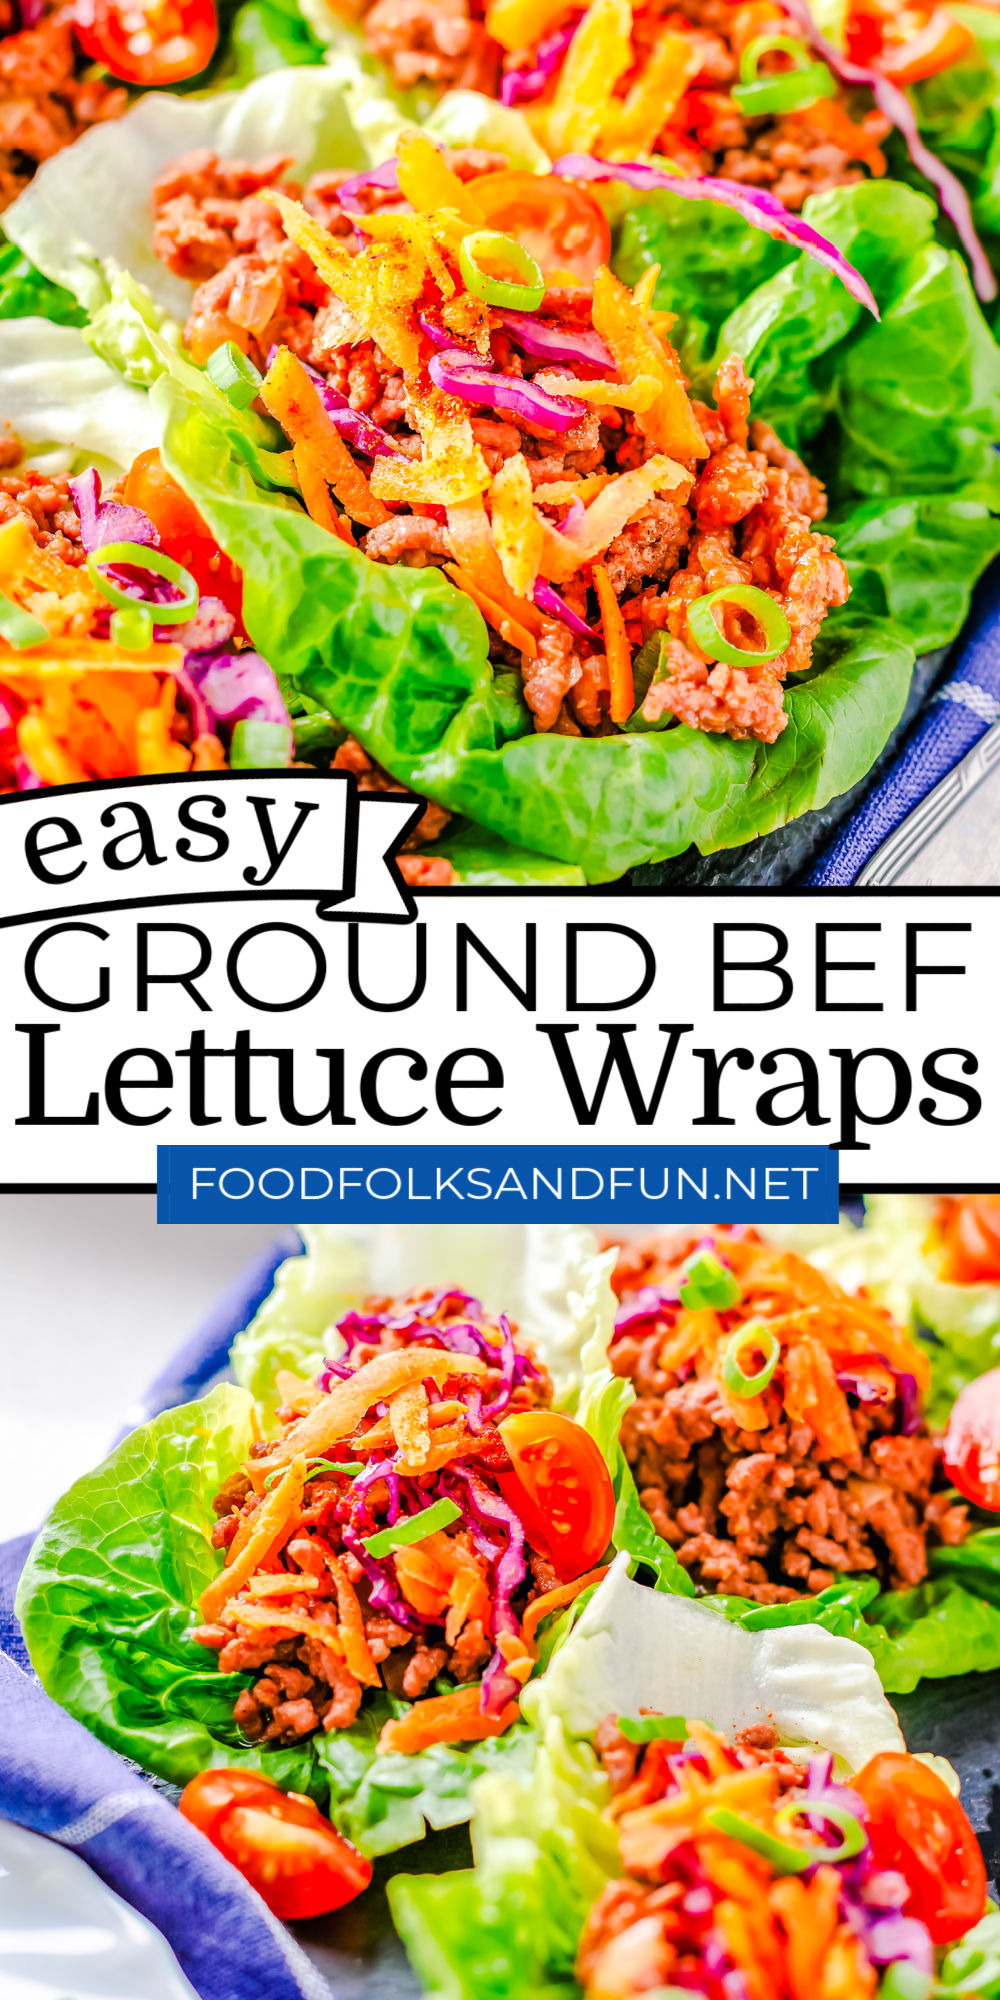 These Ground Beef Lettuce Wraps are a quick, easy, and tasty weeknight dinner that comes together in just 20 minutes. via @foodfolksandfun